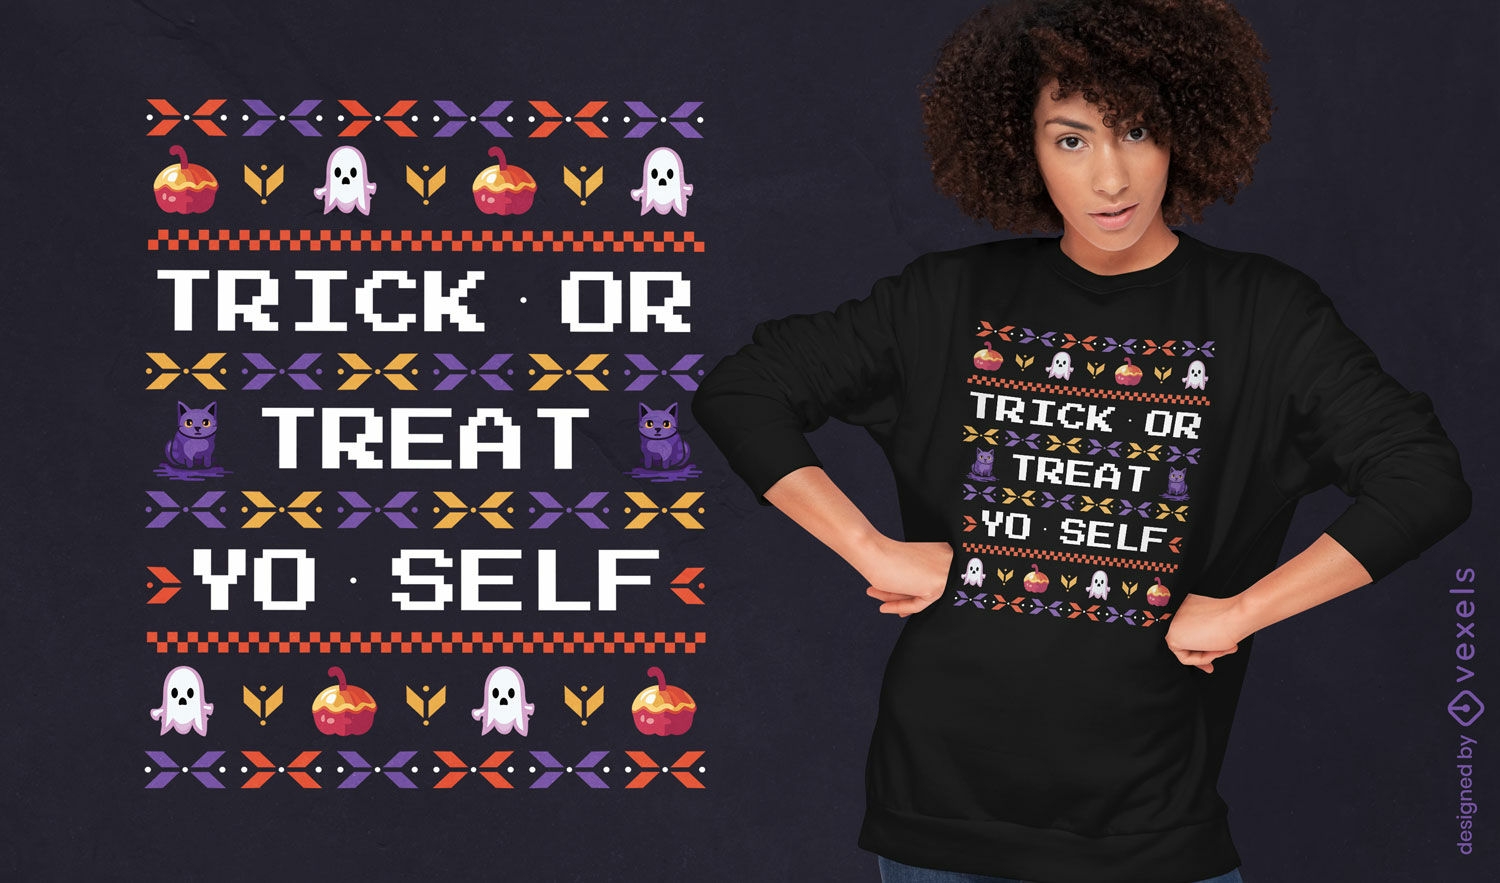 Halloween ugly sweater quote t-shirt design